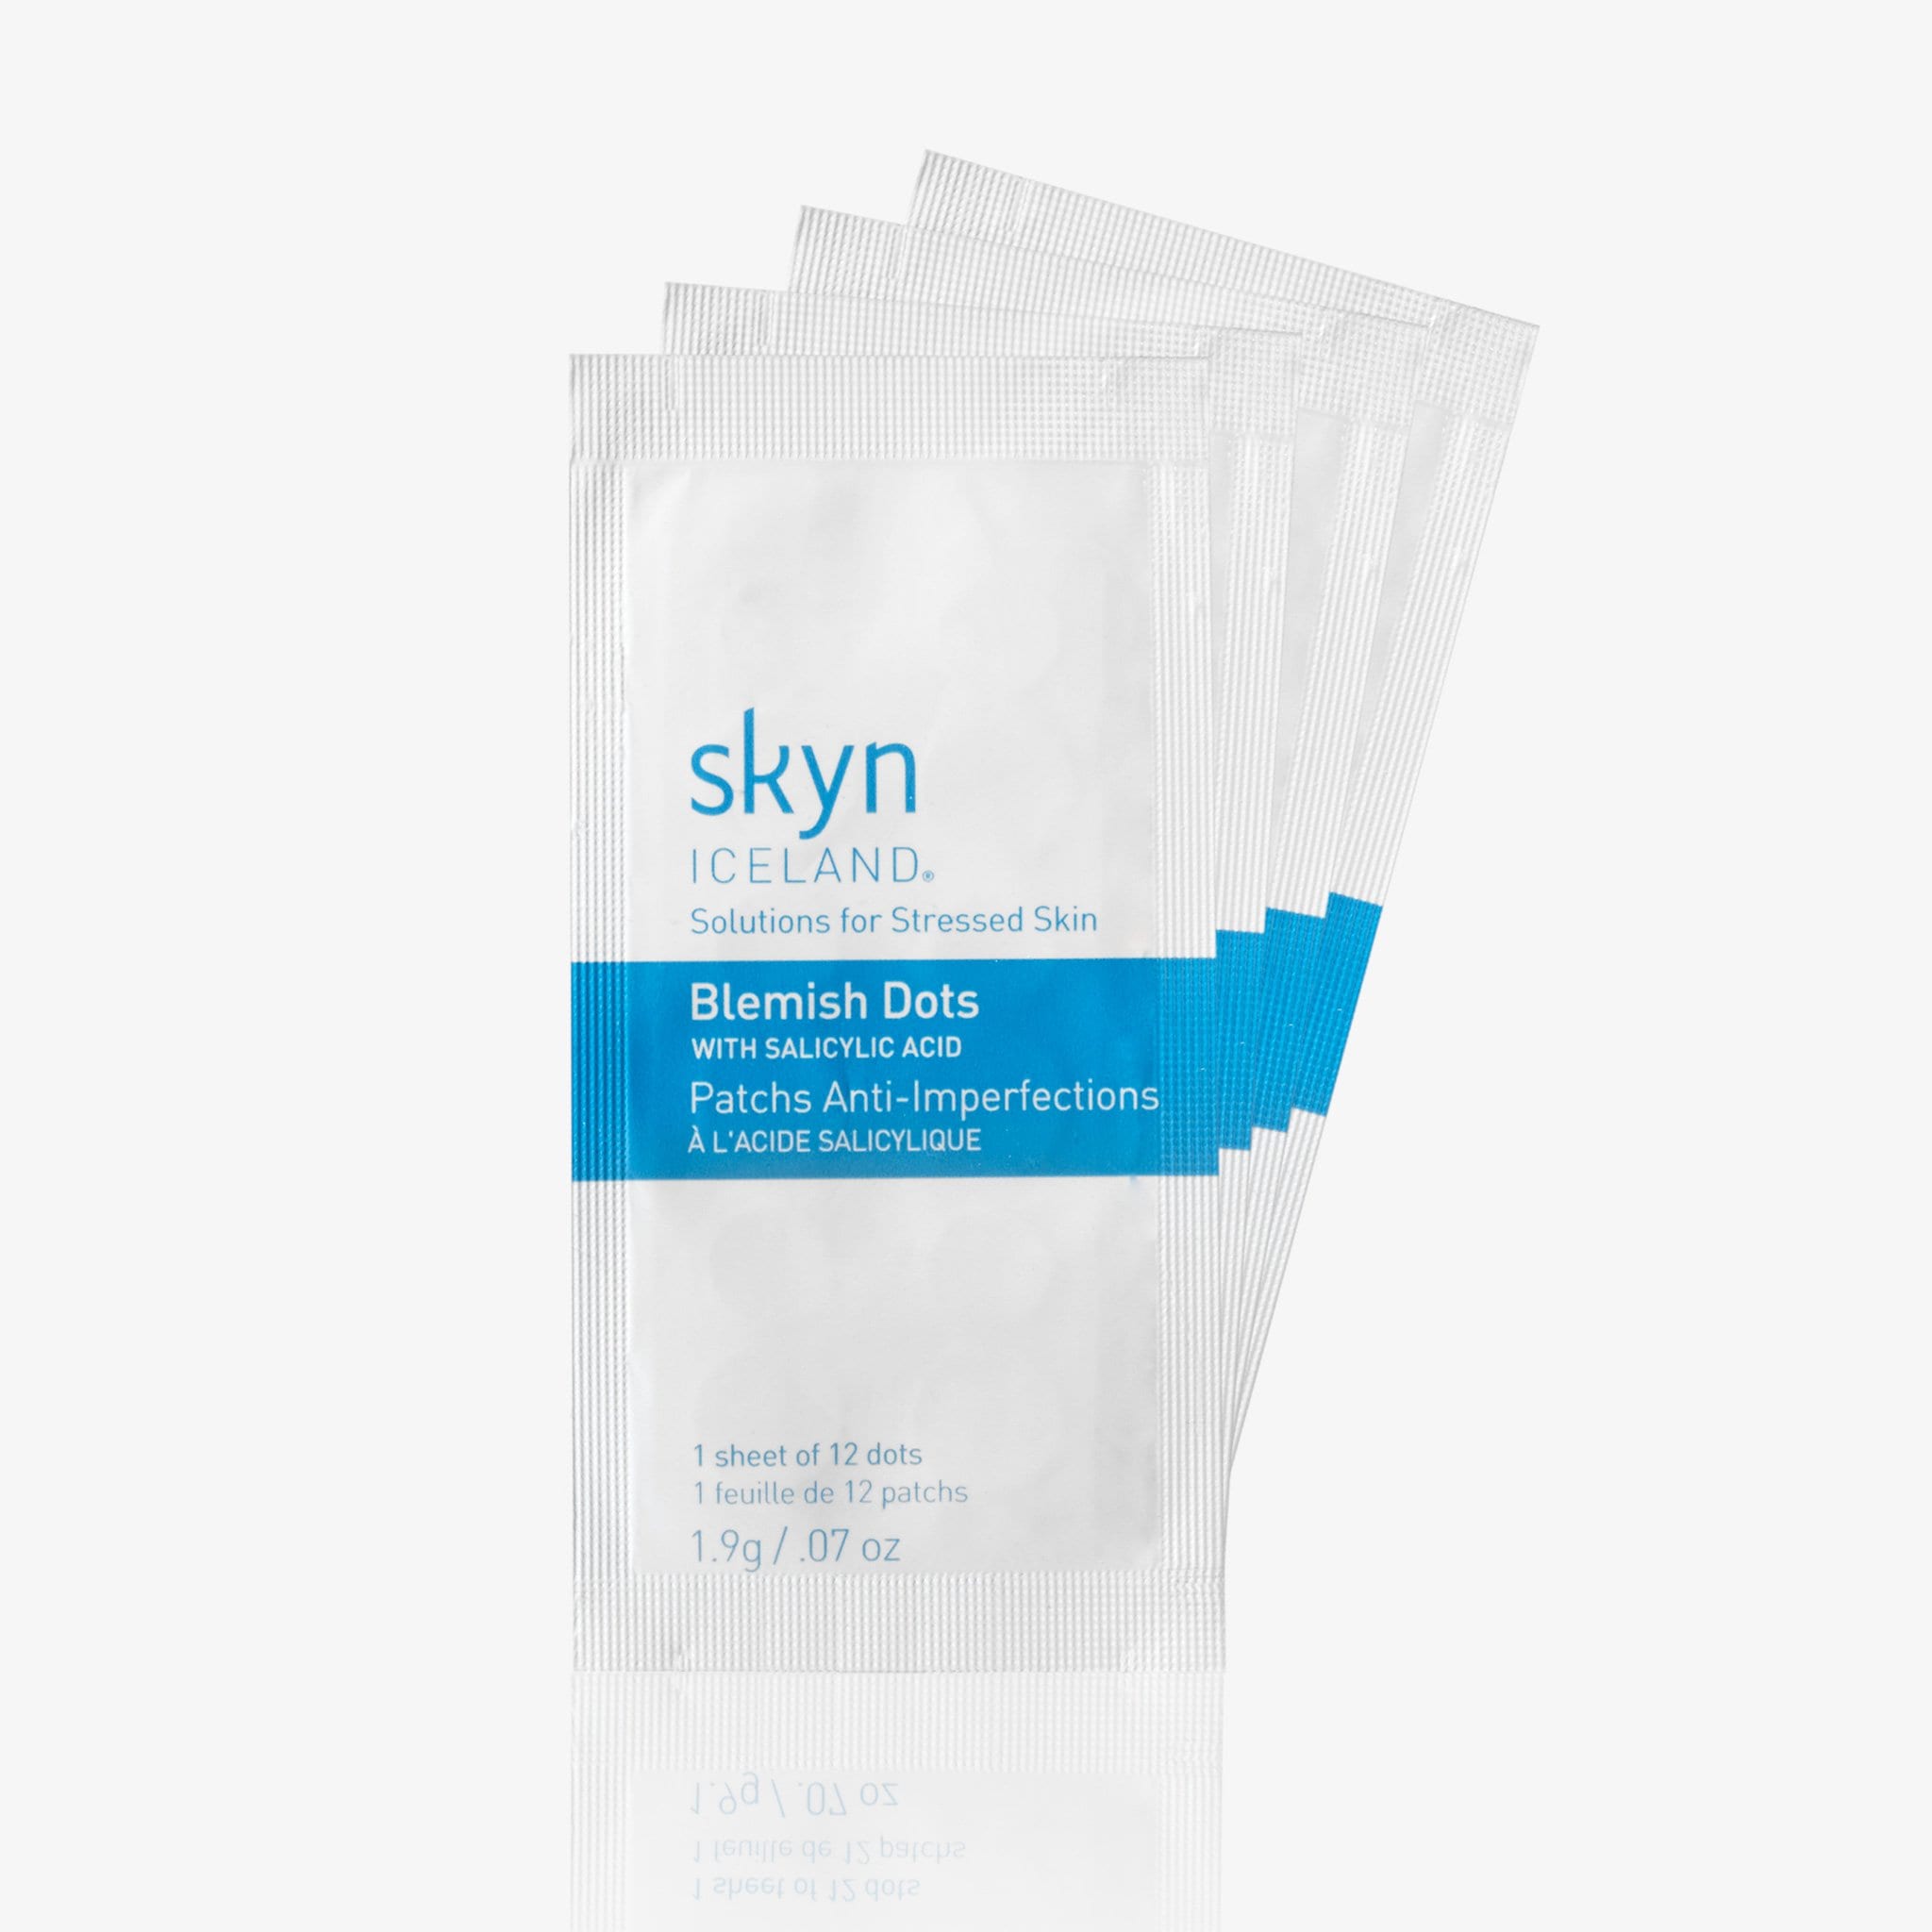 skyn ICELAND Blemish Dots: Clear Blemishes, Reduce Inflammation & Minimize Redness, 4 Sheets of 12 Dots (48 Dots)